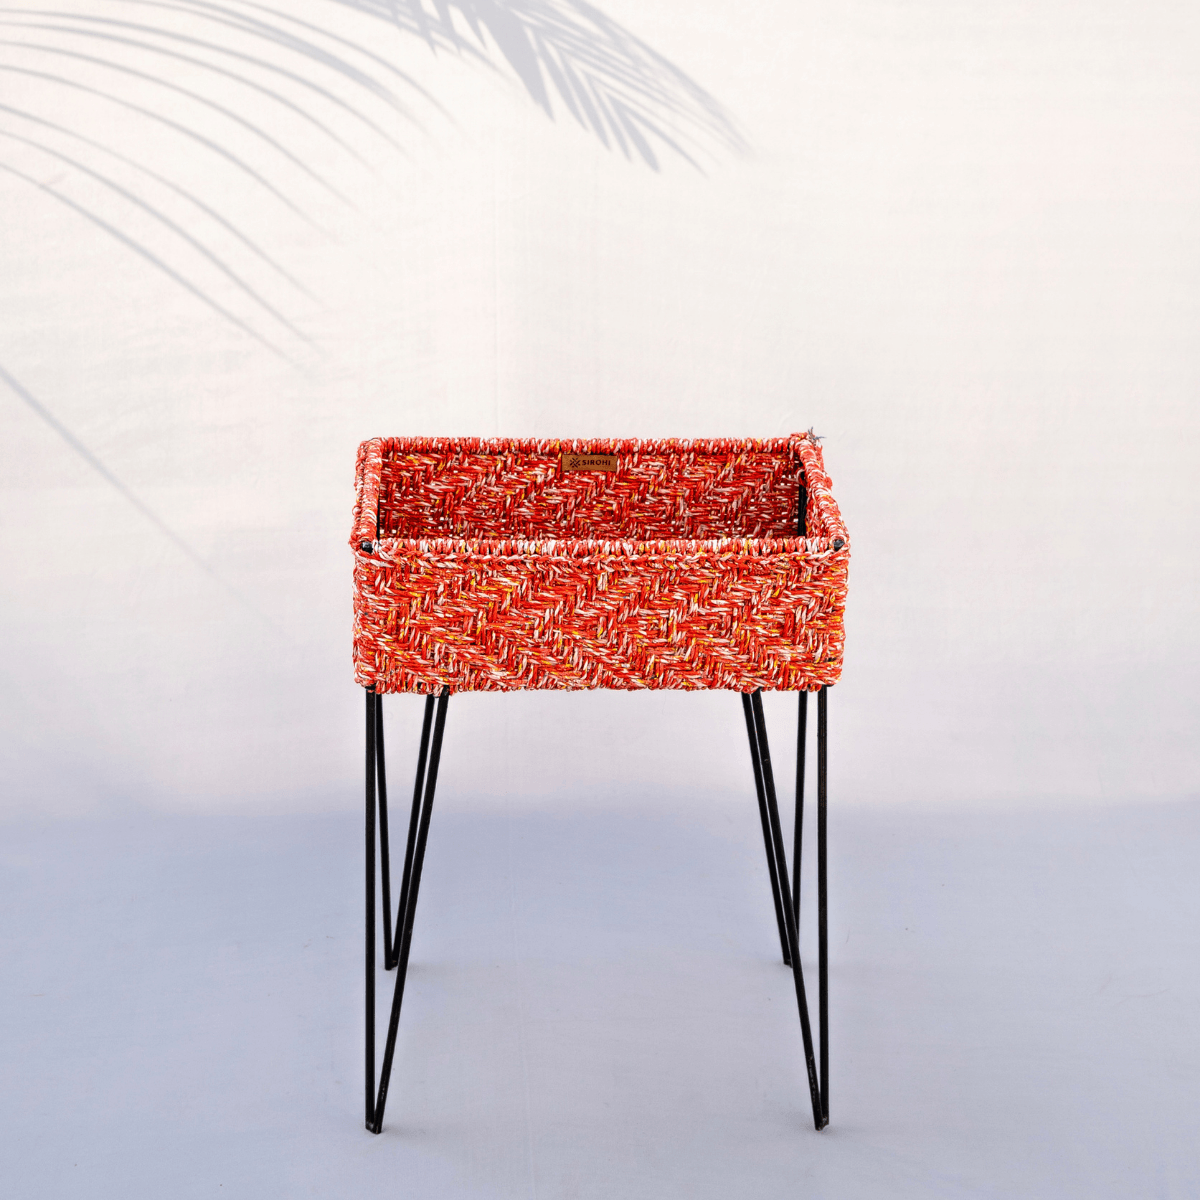 Flamingo Upcycled Plastic Box Stands - Sirohi.org - Colour_Blue, Colour_Green, Colour_Purple, Colour_Red, Colour_Silver, Colour_Yellow, Purpose_Home Accessory, Purpose_Storage, Rope Material_Plastic Waste